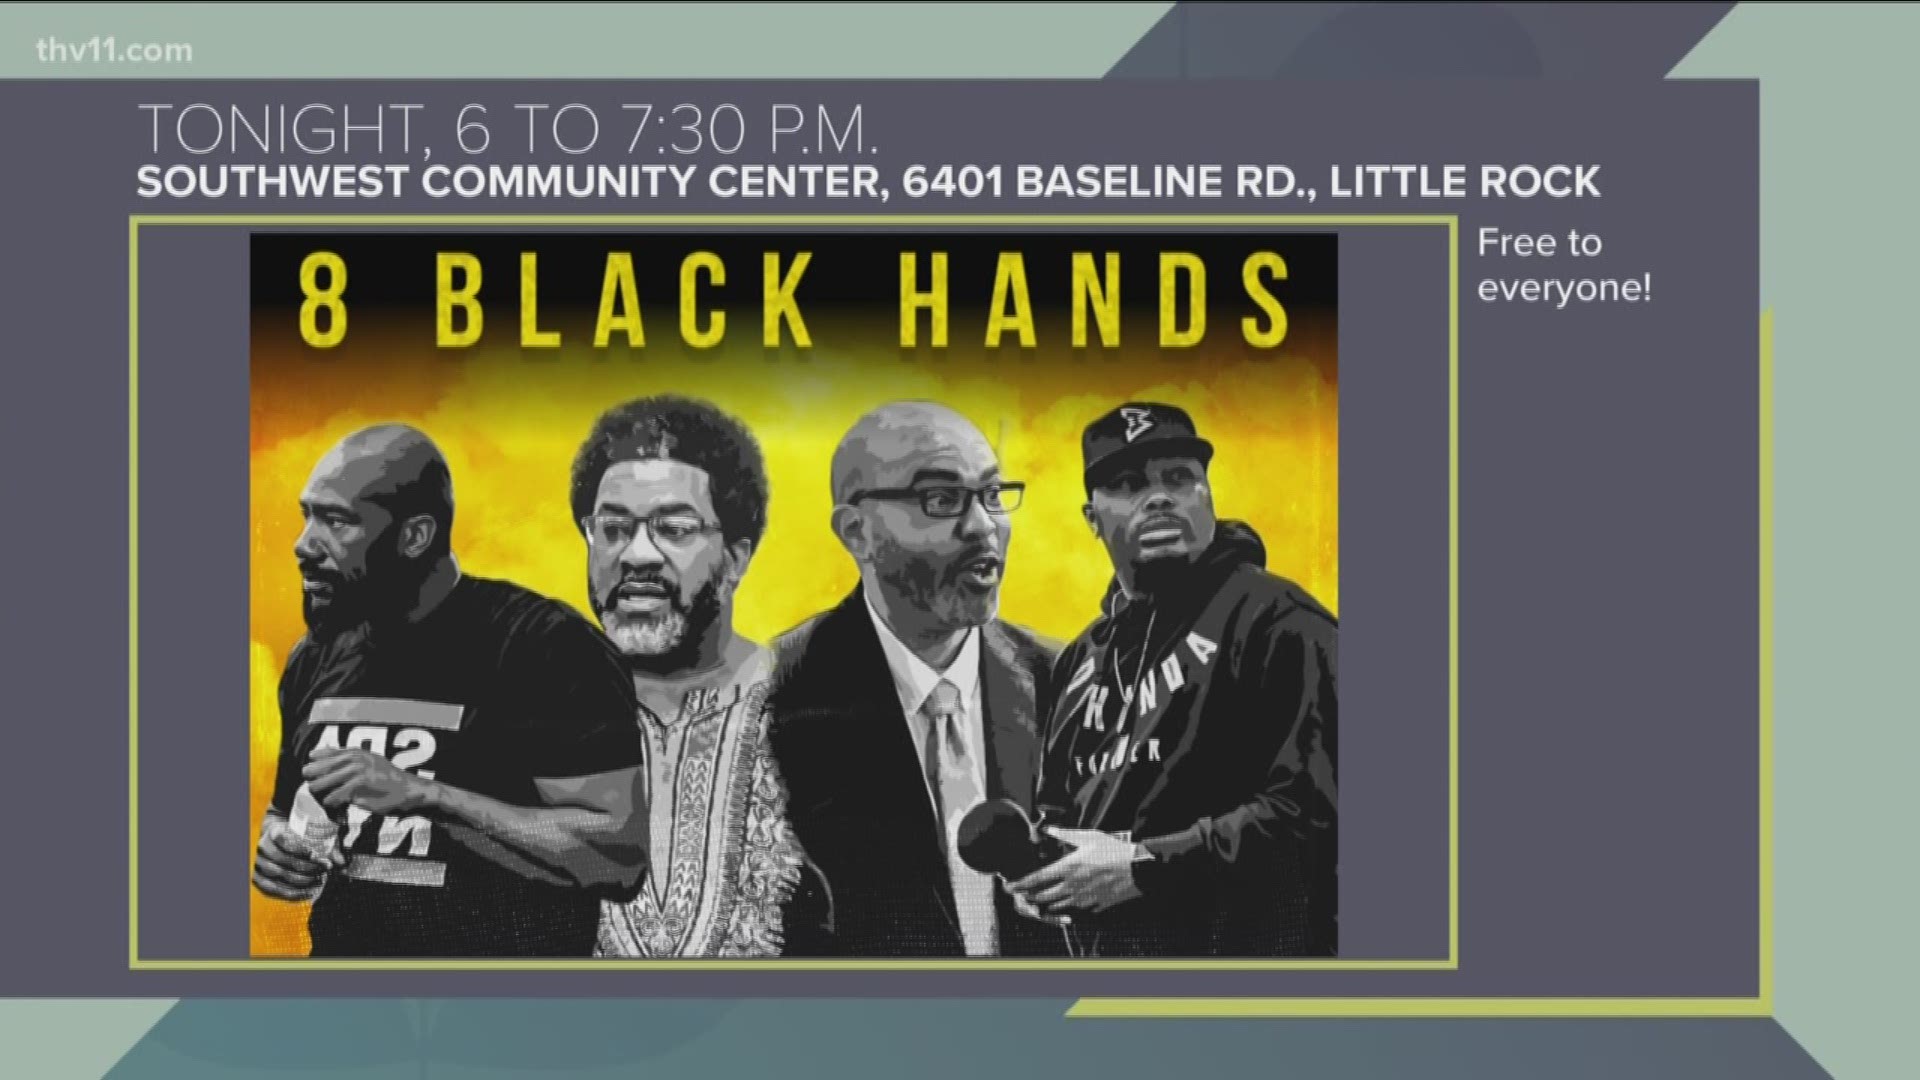 They describe themselves as "one small band of freedom fighters bringing sanity to the village." The guys behind the 8 Black Hands podcast are in Little Rock today.